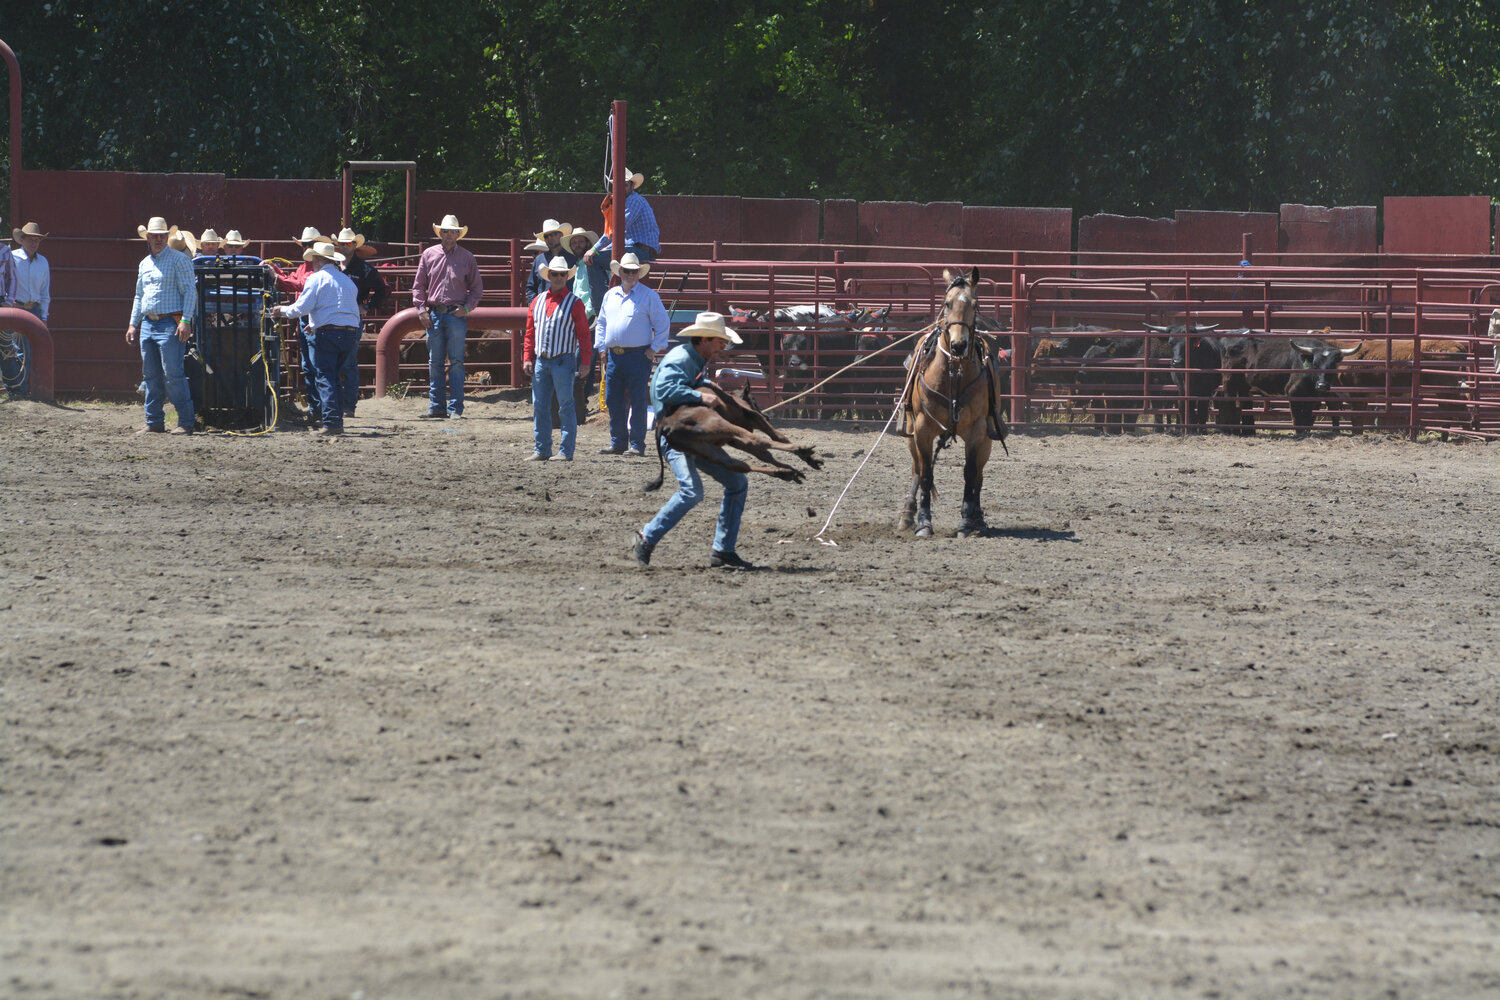 A cowboy picks up a calf during the tie-down roping competition at the Roy Pioneer Rodeo on June 4.